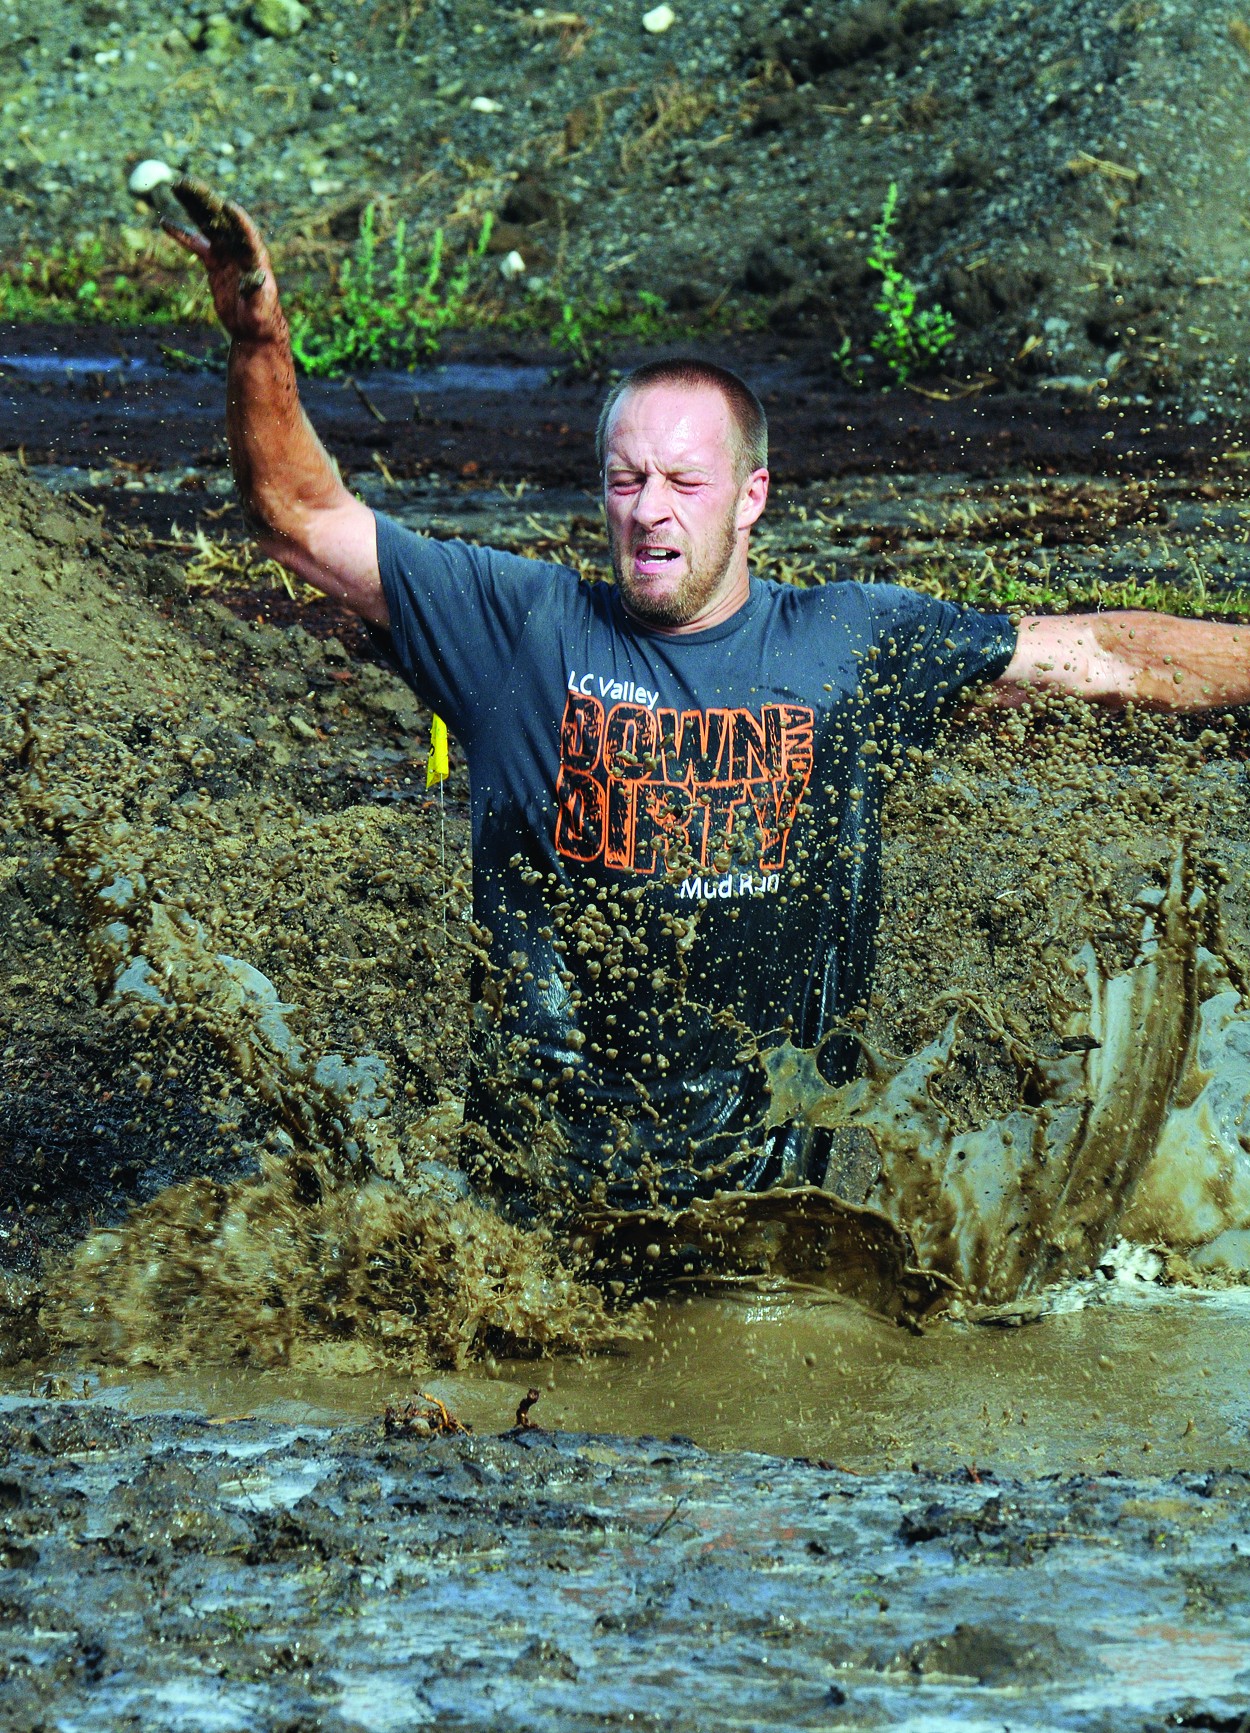 2014 Down N Dirty Mud Run: Women's and men's results